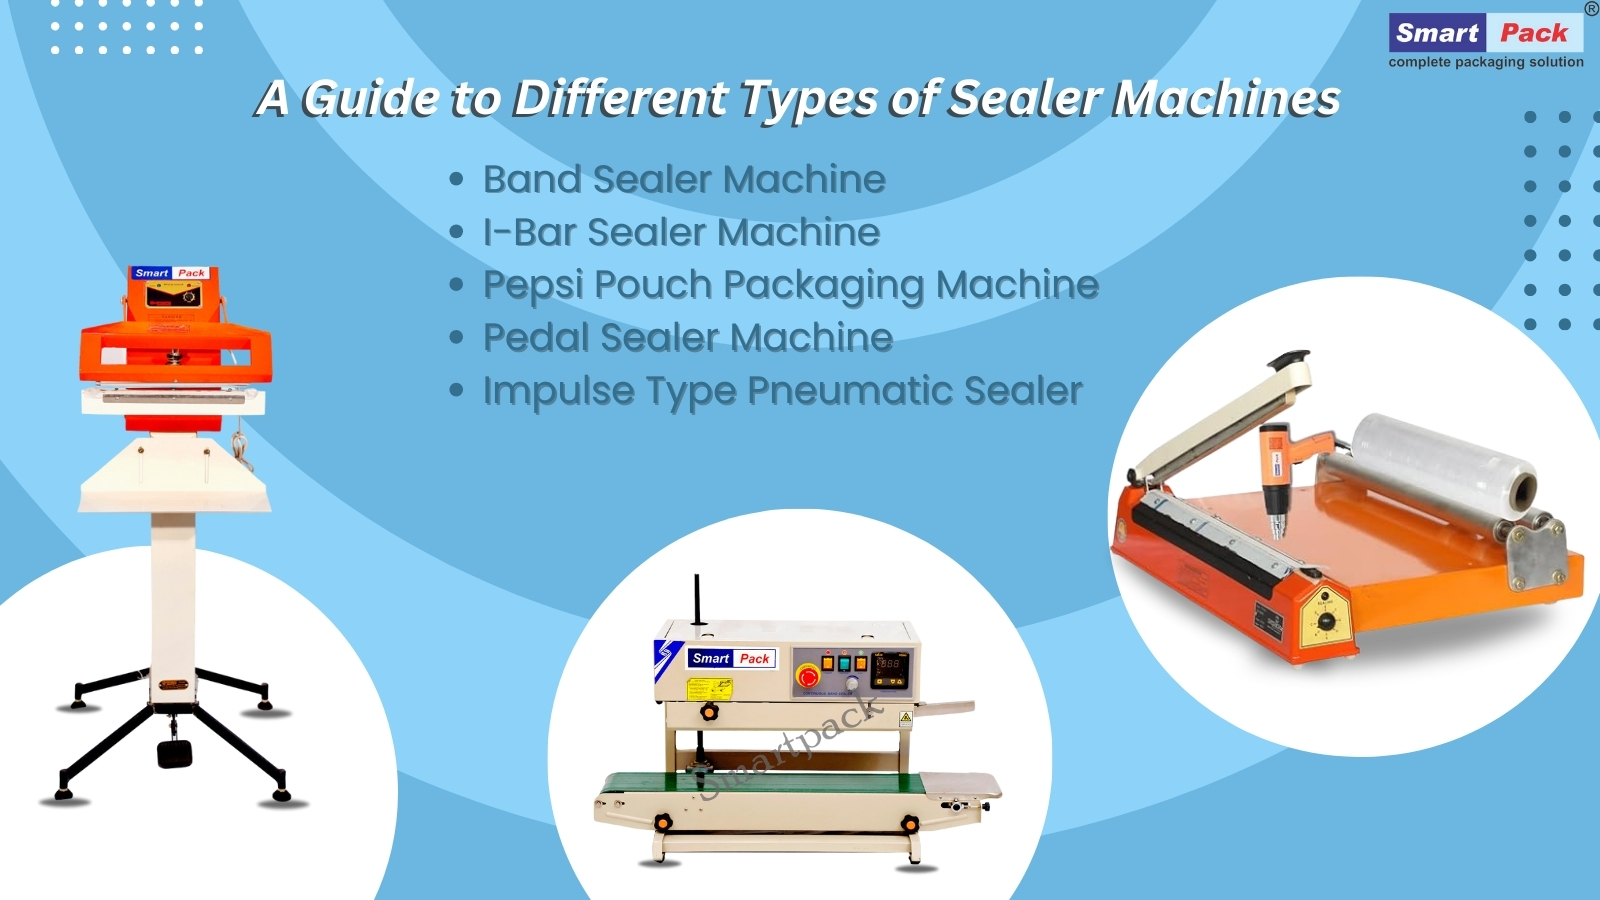 A Guide to Different Types of Smart Pack Sealer Machines and Their Prices